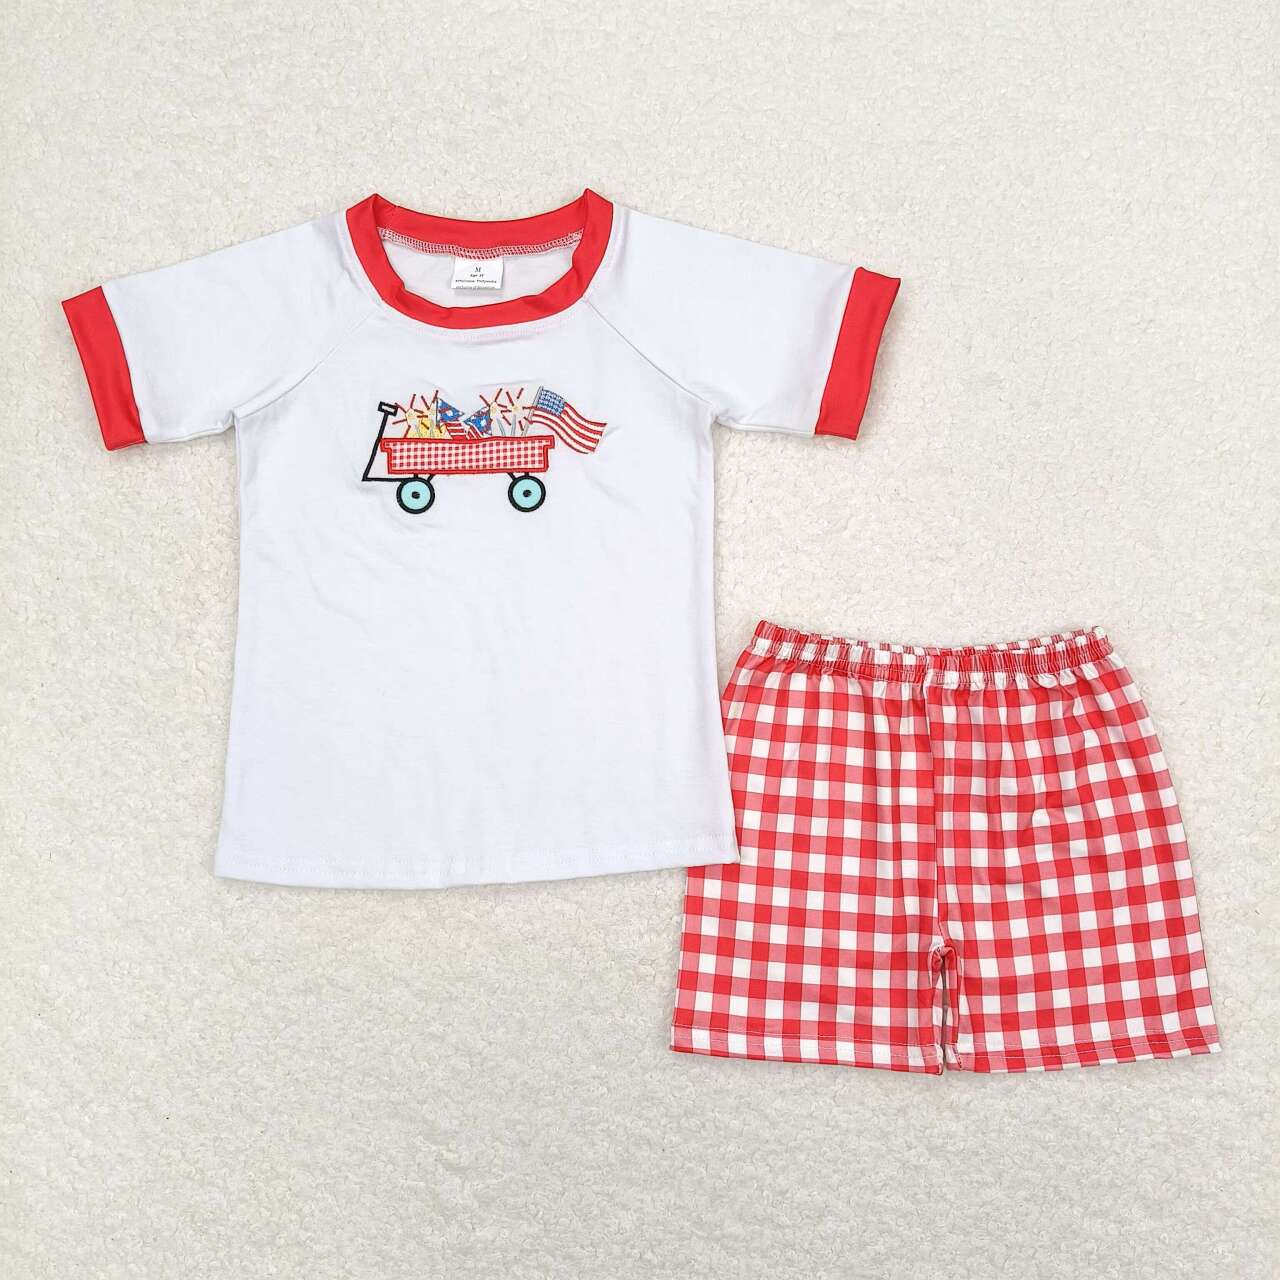 embroidery July 4th truck flag sibling clothes